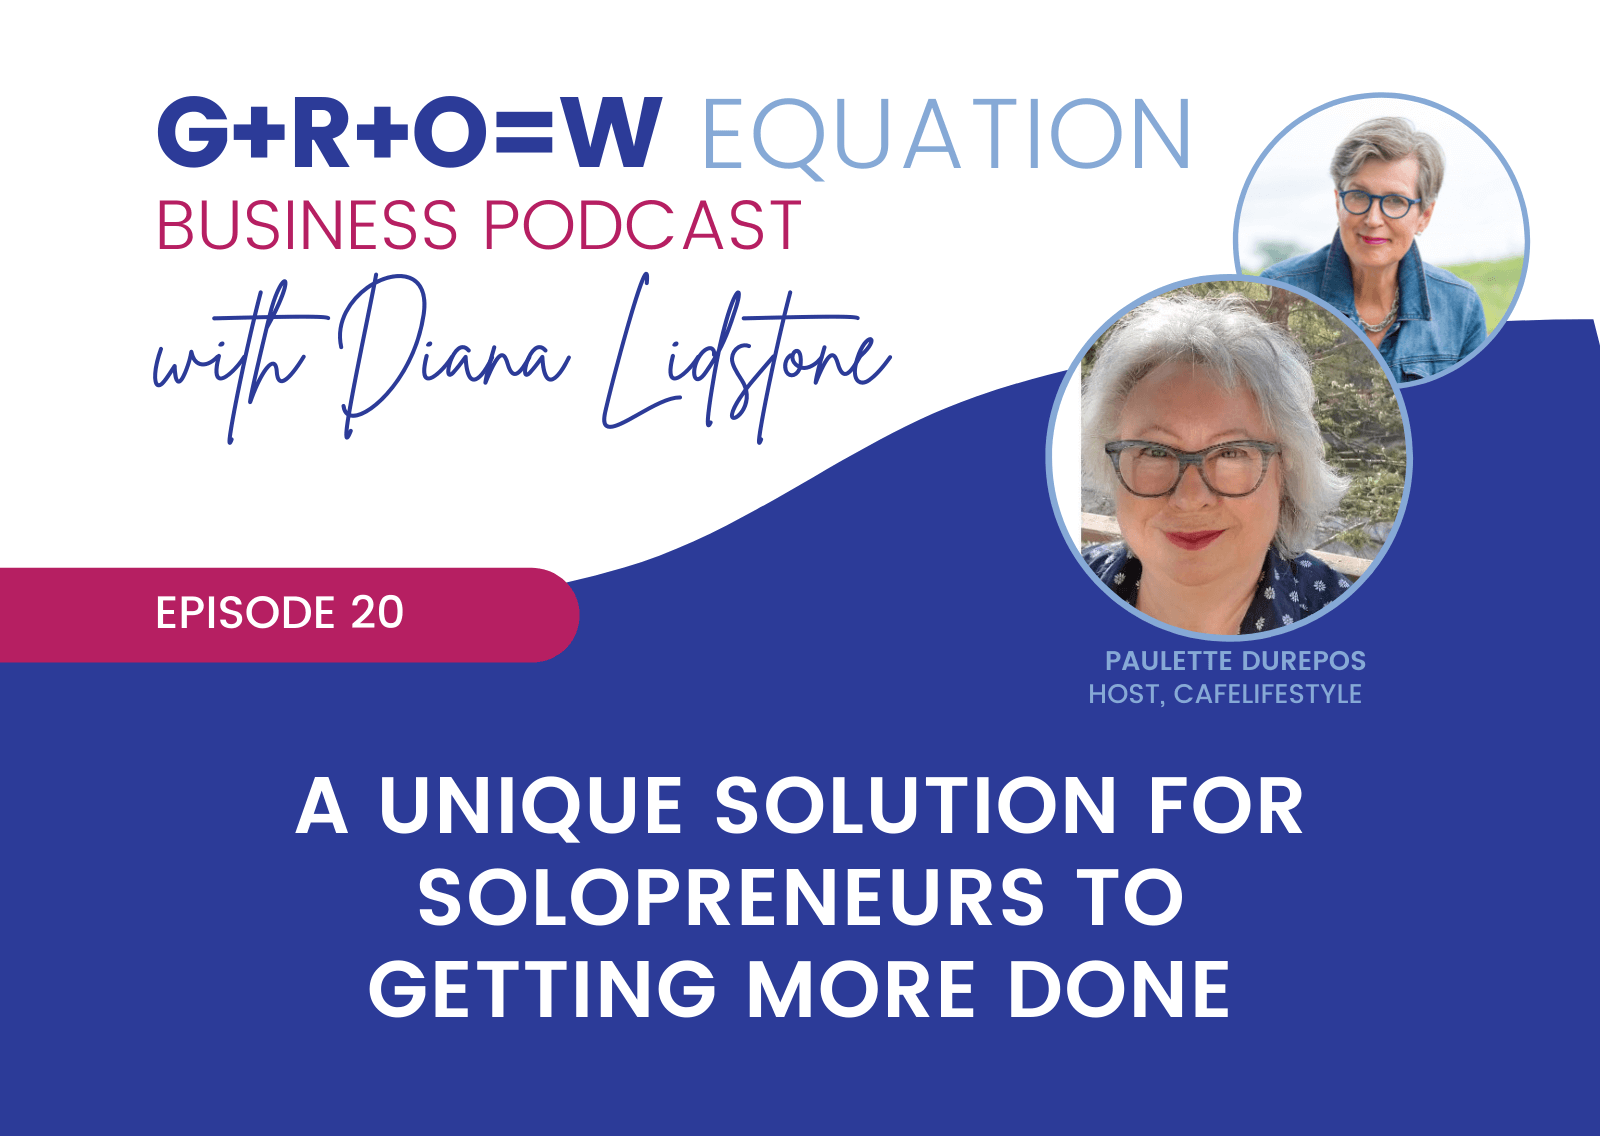 The GROW Equation Podcast with Guest Paulette Durepos